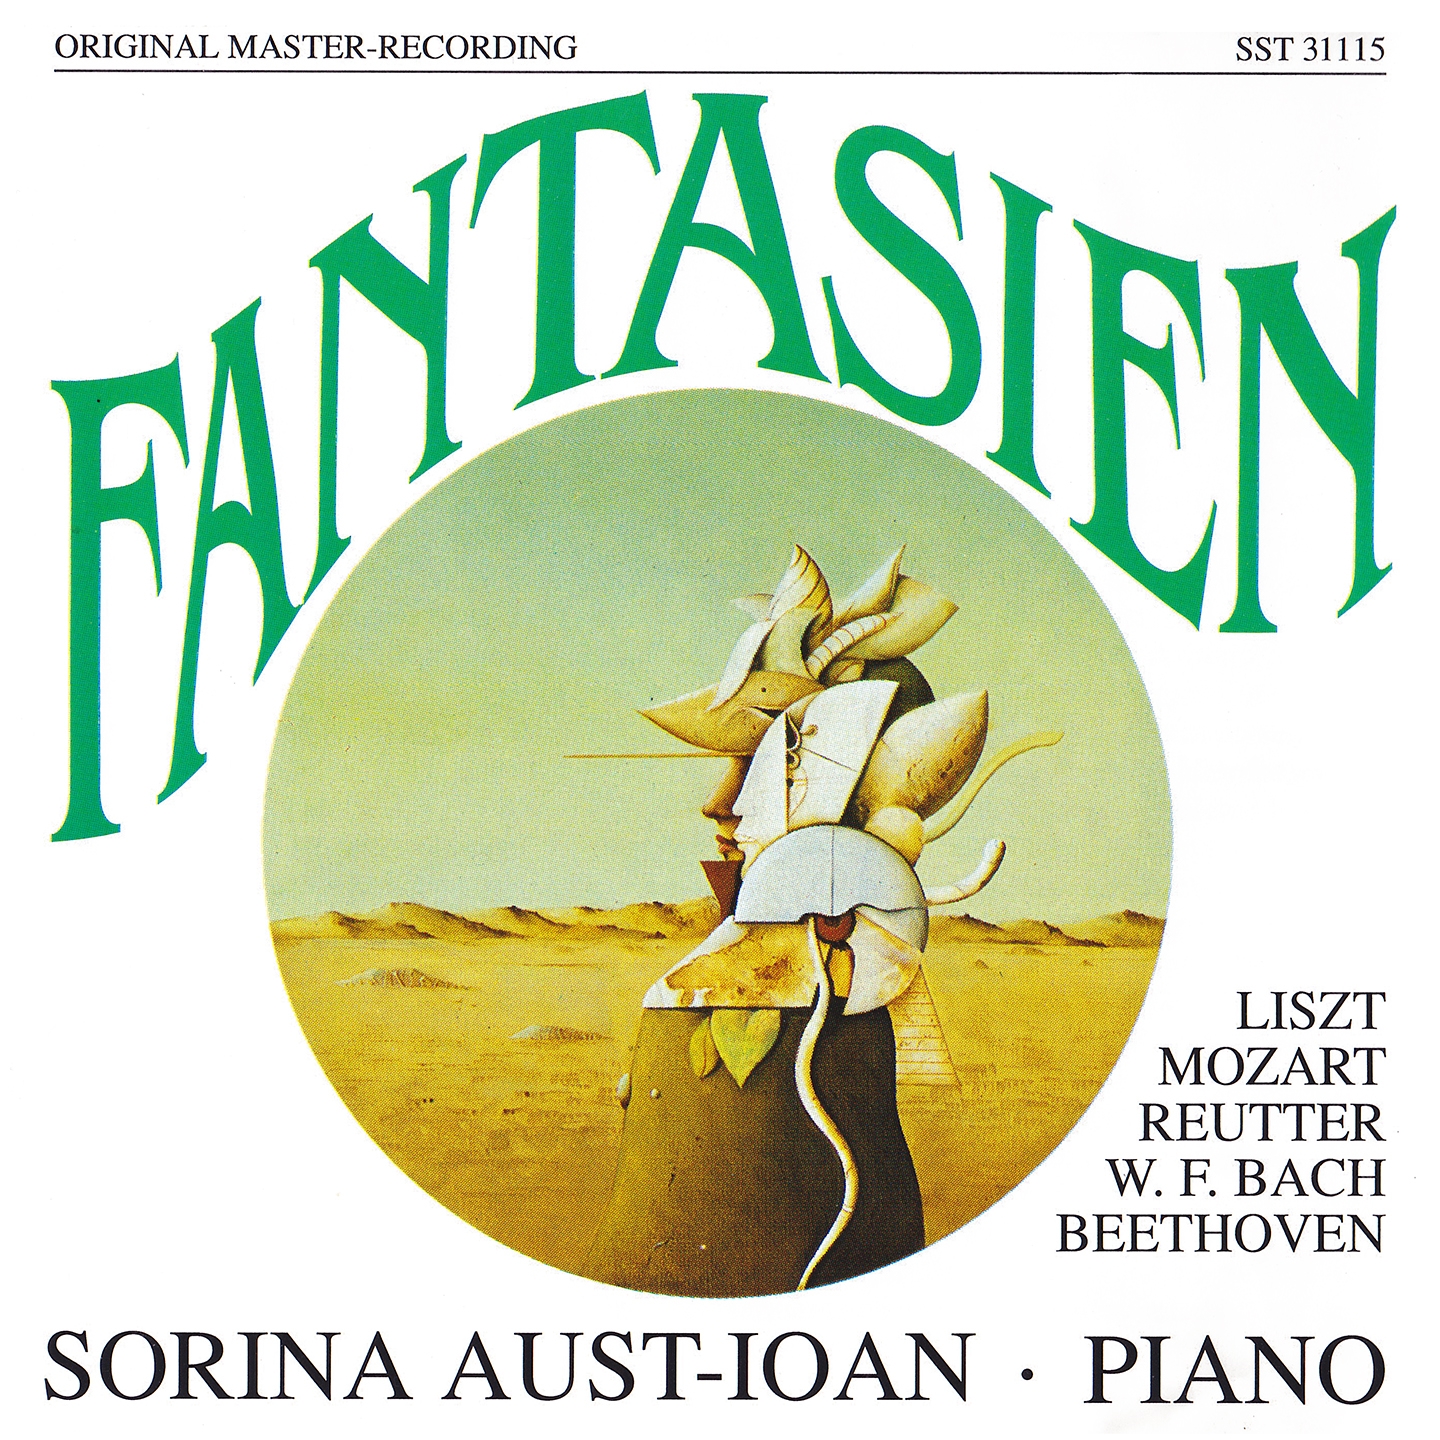 Fantasia for Piano, Op. 77